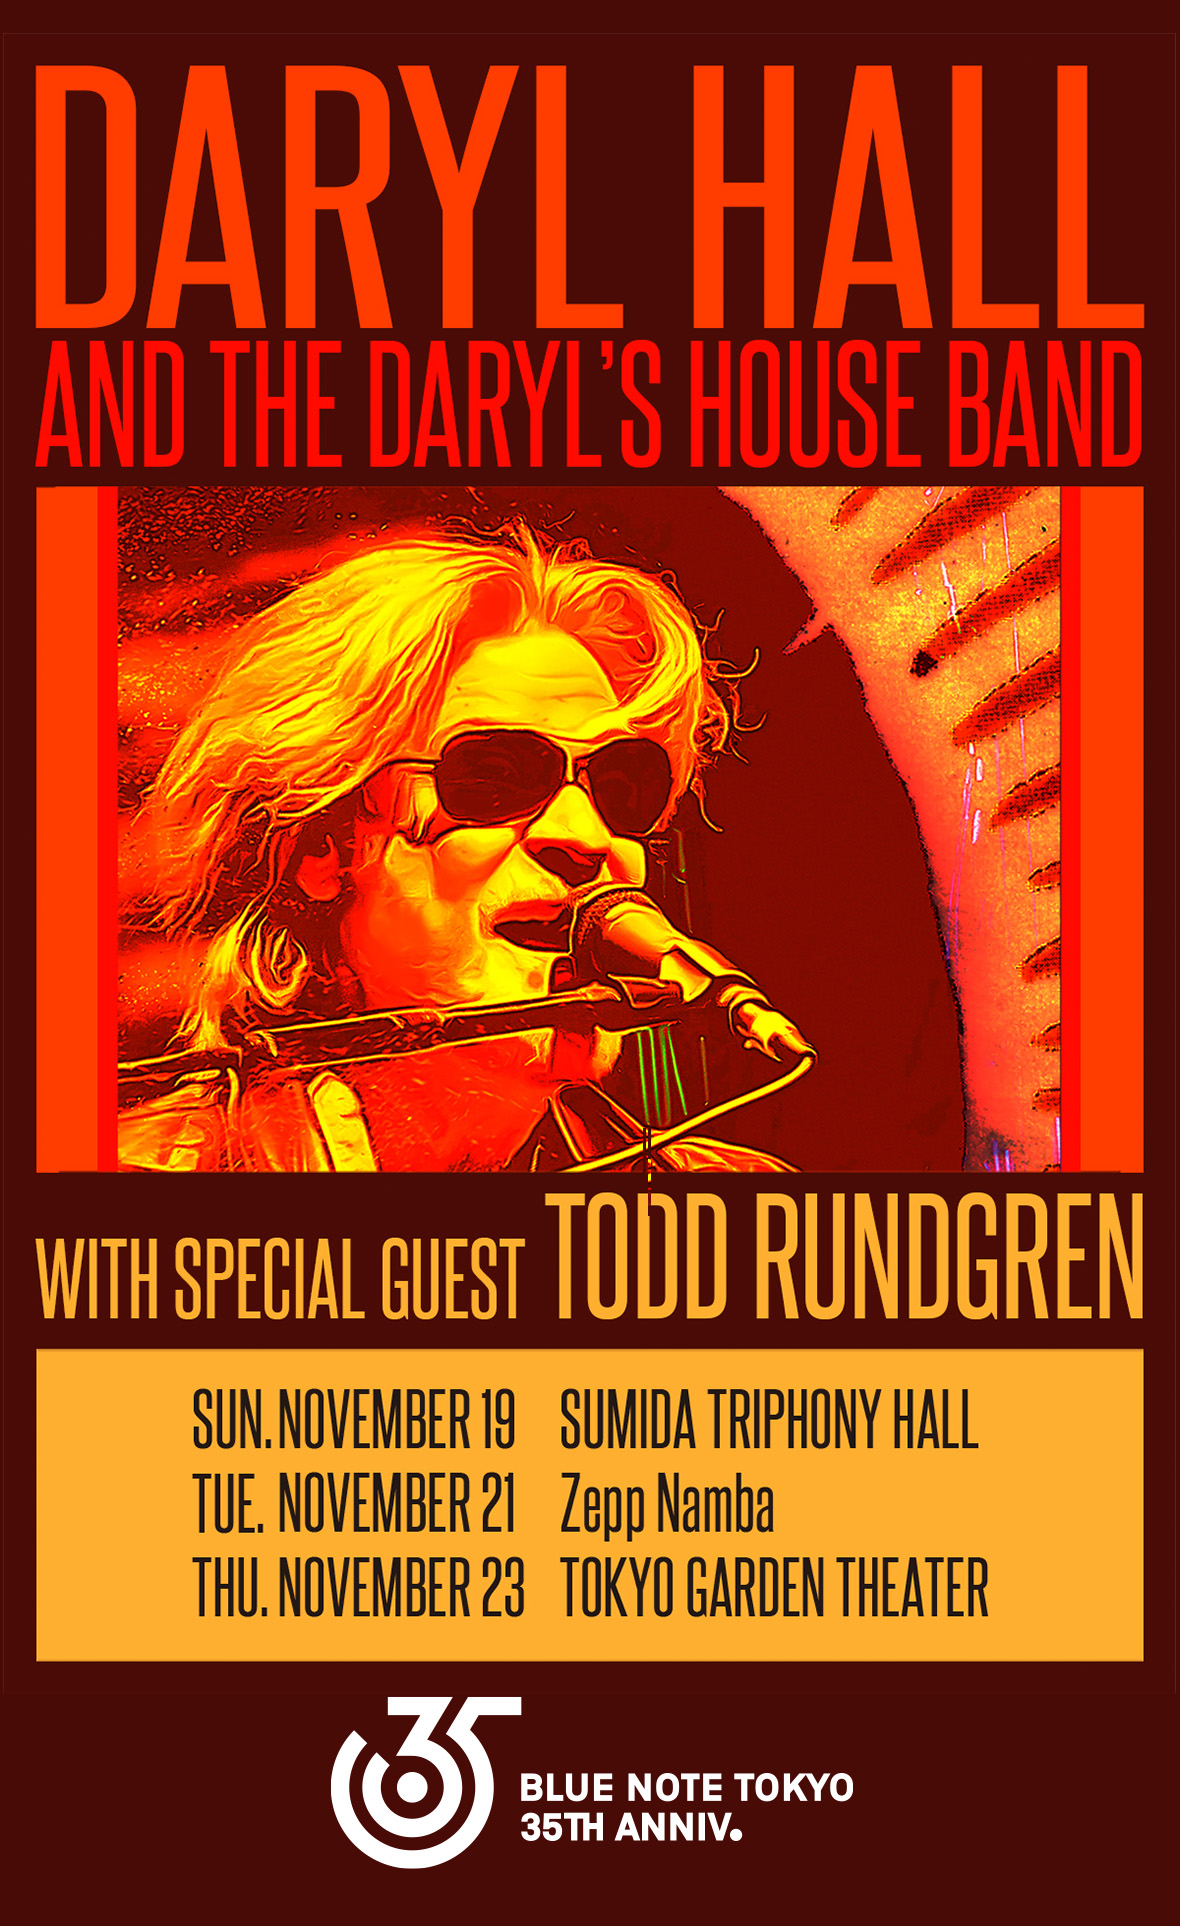 Daryl Hall and the Daryl’s House Band with Special Guest Todd Rundgren